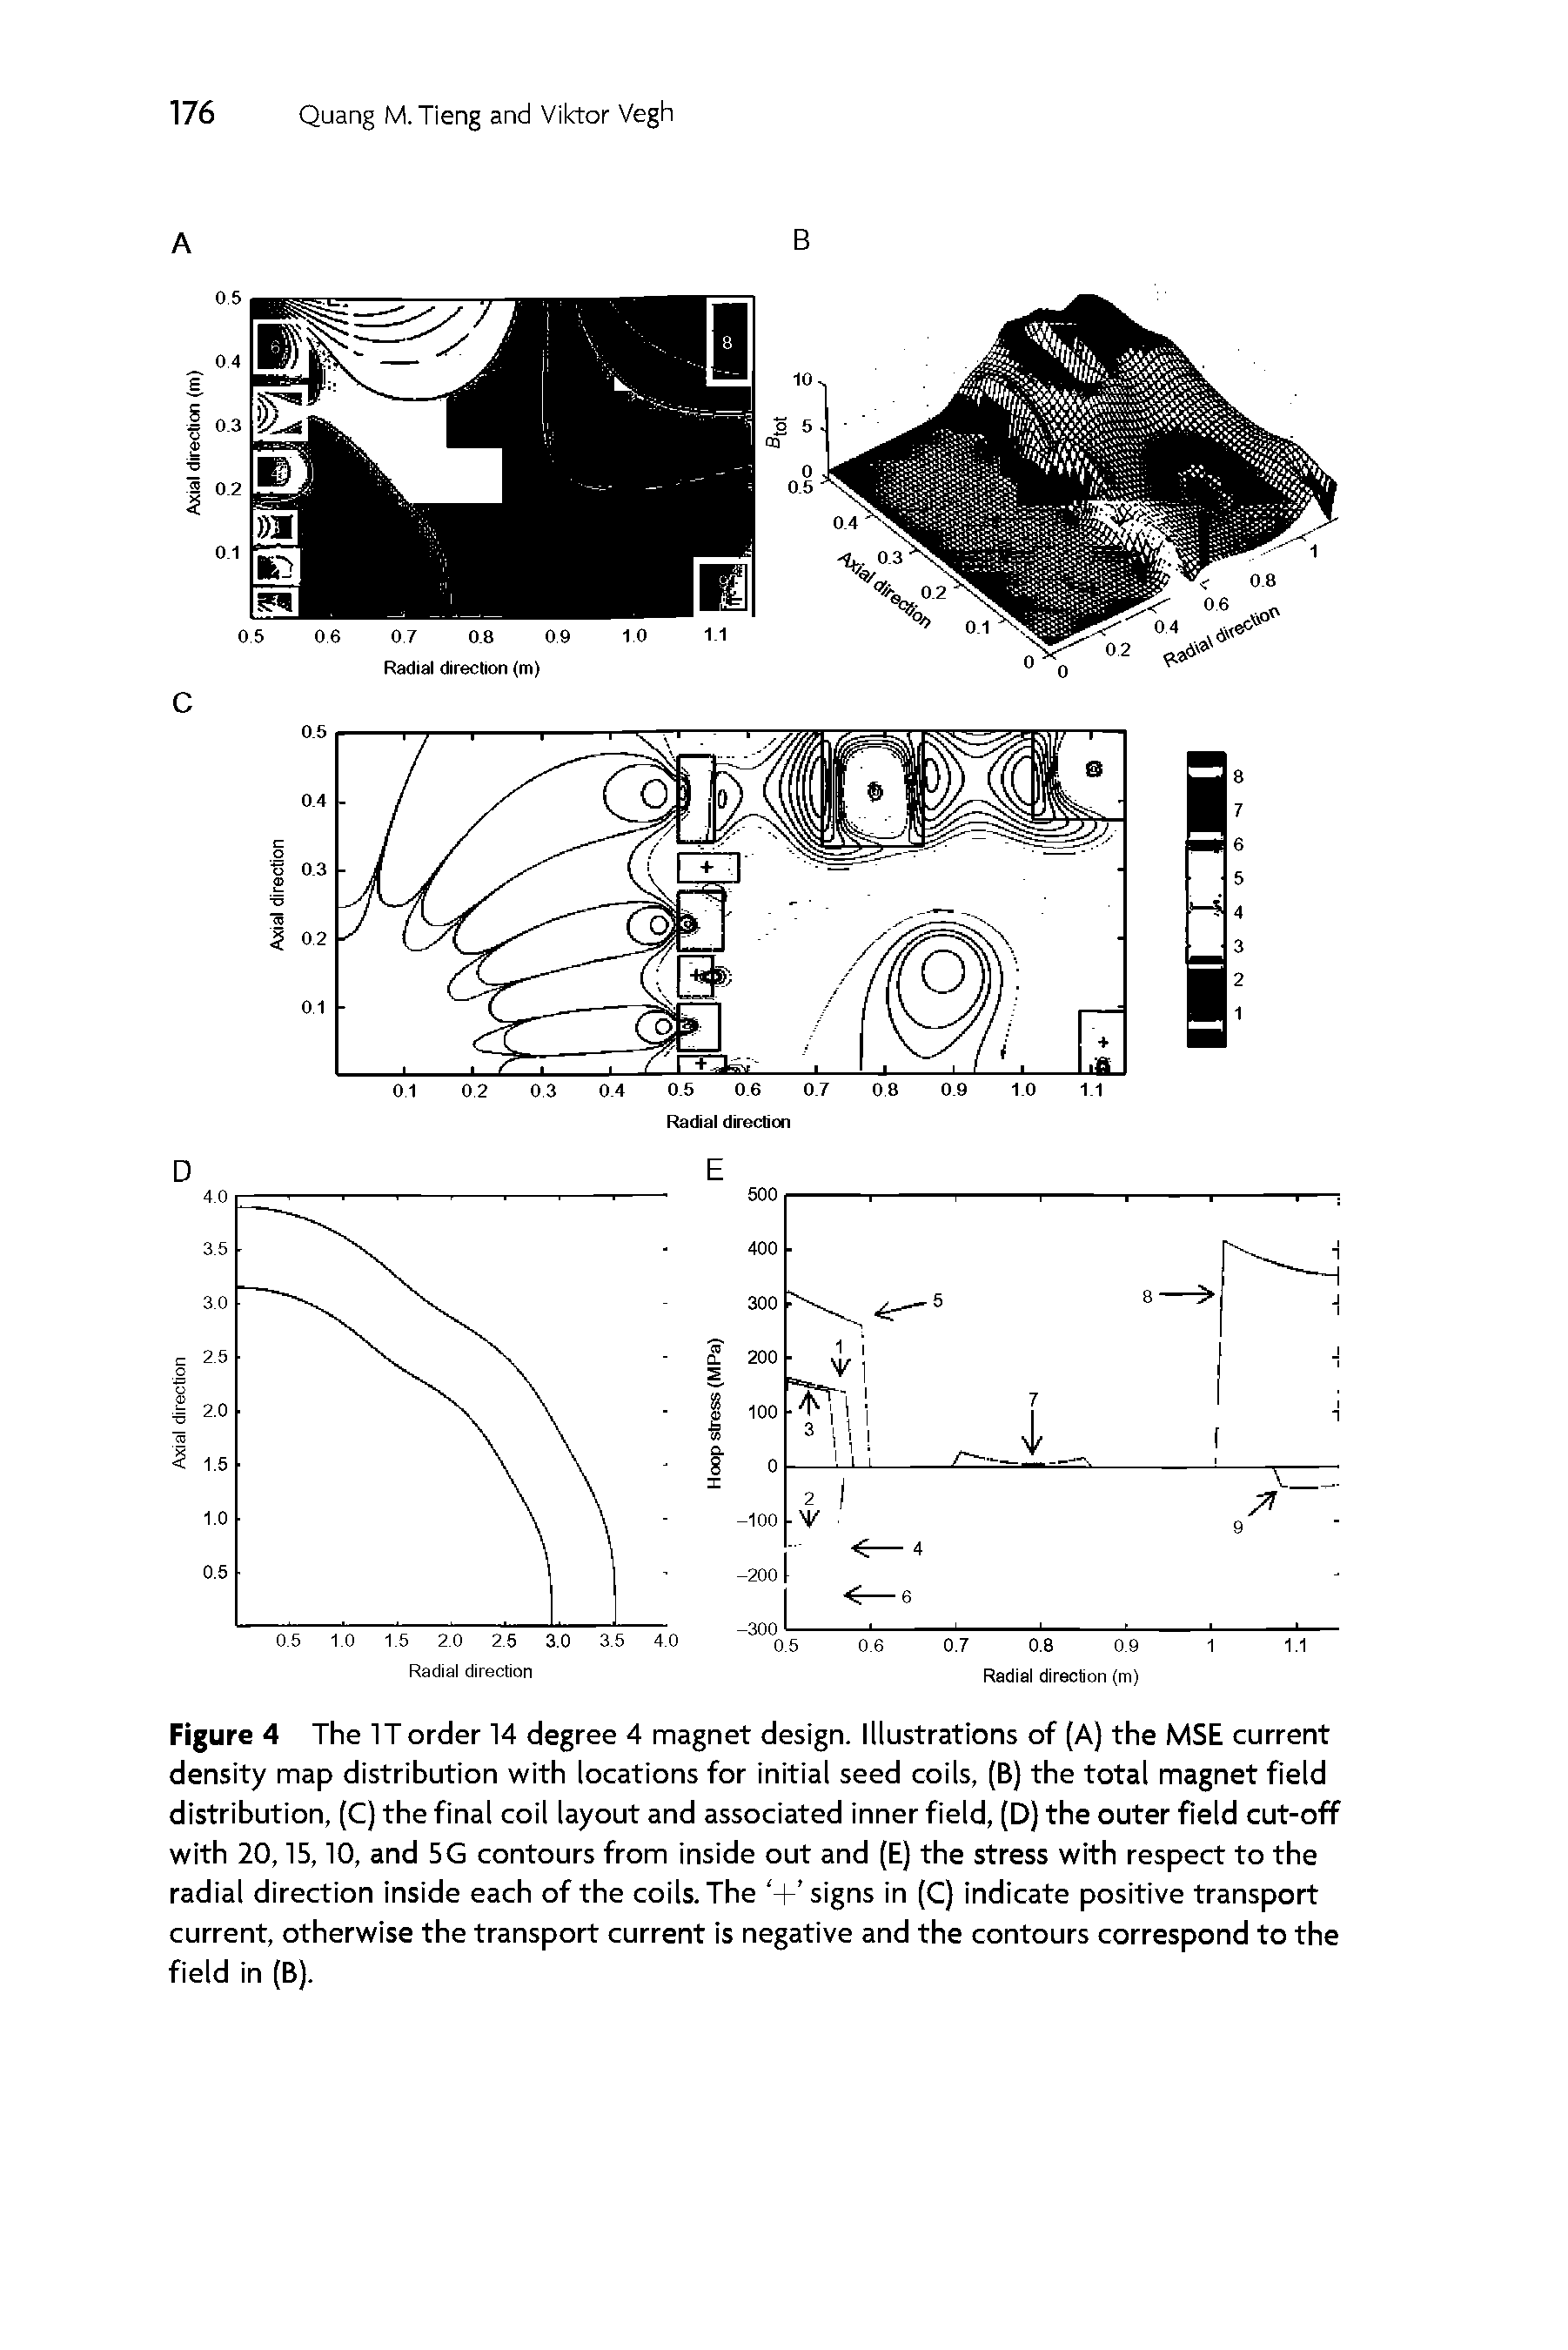 Figure 4 The IT order 14 degree 4 magnet design. Illustrations of (A) the MSE current density map distribution with locations for initial seed coils, (B) the total magnet field distribution, (C) the final coil layout and associated inner field, (D) the outer field cut-off with 20,15,10, and 5G contours from inside out and (E) the stress with respect to the radial direction inside each of the coils. The + signs in (C) indicate positive transport current, otherwise the transport current is negative and the contours correspond to the field in (B).